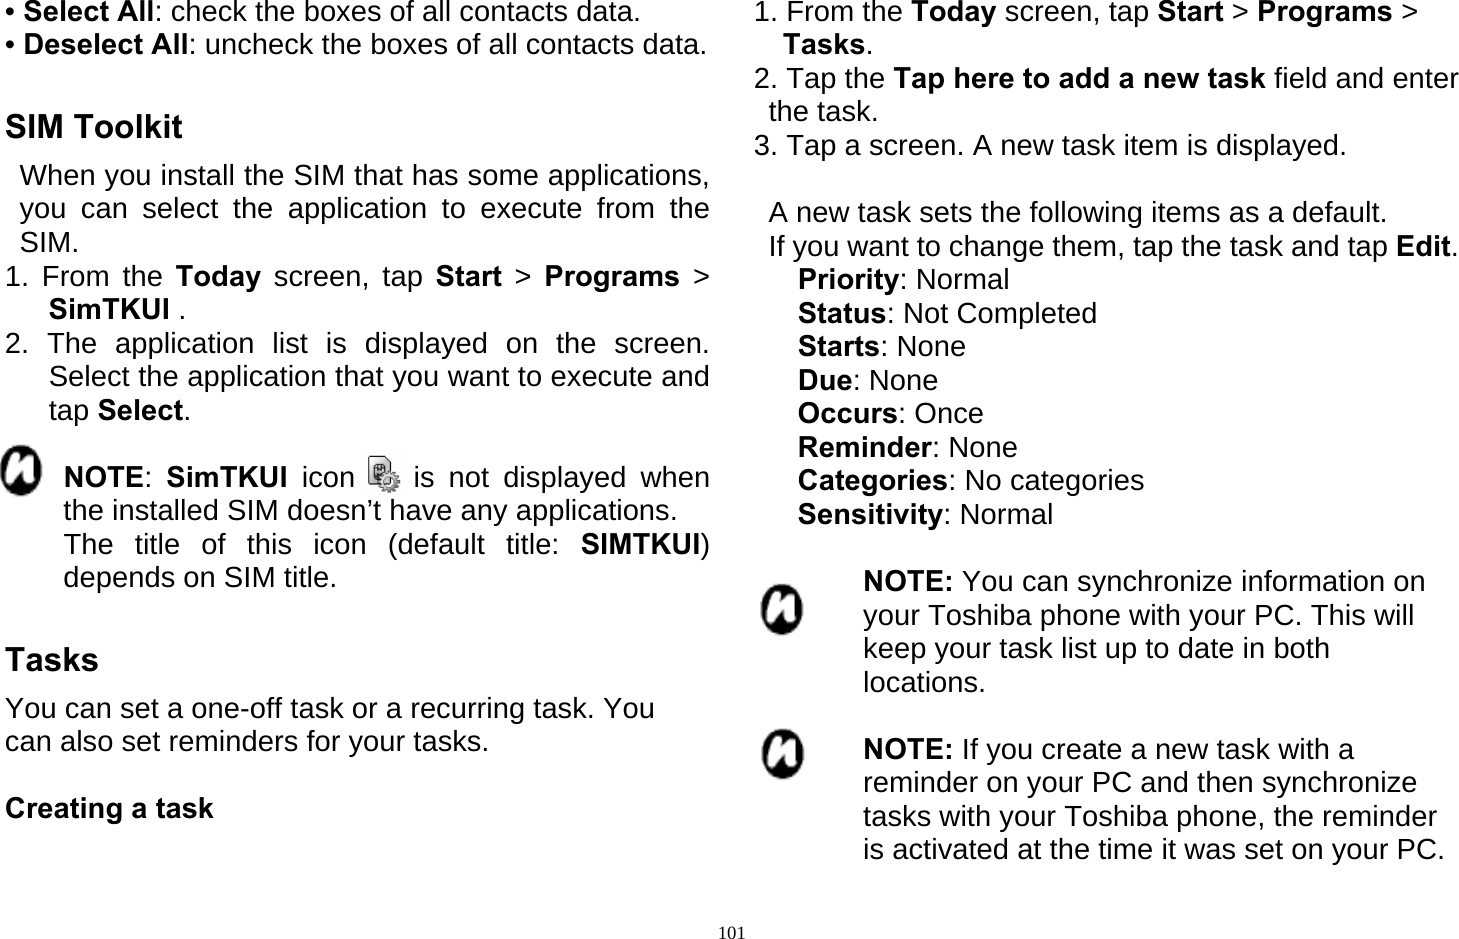   101• Select All: check the boxes of all contacts data. • Deselect All: uncheck the boxes of all contacts data.  SIM Toolkit   When you install the SIM that has some applications, you can select the application to execute from the SIM. 1. From the Today  screen, tap Start  &gt;  Programs &gt; SimTKUI . 2. The application list is displayed on the screen. Select the application that you want to execute and tap Select.         NOTE:  SimTKUI icon    is not displayed when the installed SIM doesn’t have any applications.     The title of this icon (default title: SIMTKUI) depends on SIM title.  Tasks You can set a one-off task or a recurring task. You can also set reminders for your tasks.  Creating a task  1. From the Today screen, tap Start &gt; Programs &gt;  Tasks. 2. Tap the Tap here to add a new task field and enter the task. 3. Tap a screen. A new task item is displayed.    A new task sets the following items as a default.   If you want to change them, tap the task and tap Edit.    Priority: Normal    Status: Not Completed    Starts: None    Due: None    Occurs: Once    Reminder: None    Categories: No categories    Sensitivity: Normal  NOTE: You can synchronize information on your Toshiba phone with your PC. This will keep your task list up to date in both locations.  NOTE: If you create a new task with a reminder on your PC and then synchronize tasks with your Toshiba phone, the reminder is activated at the time it was set on your PC. 